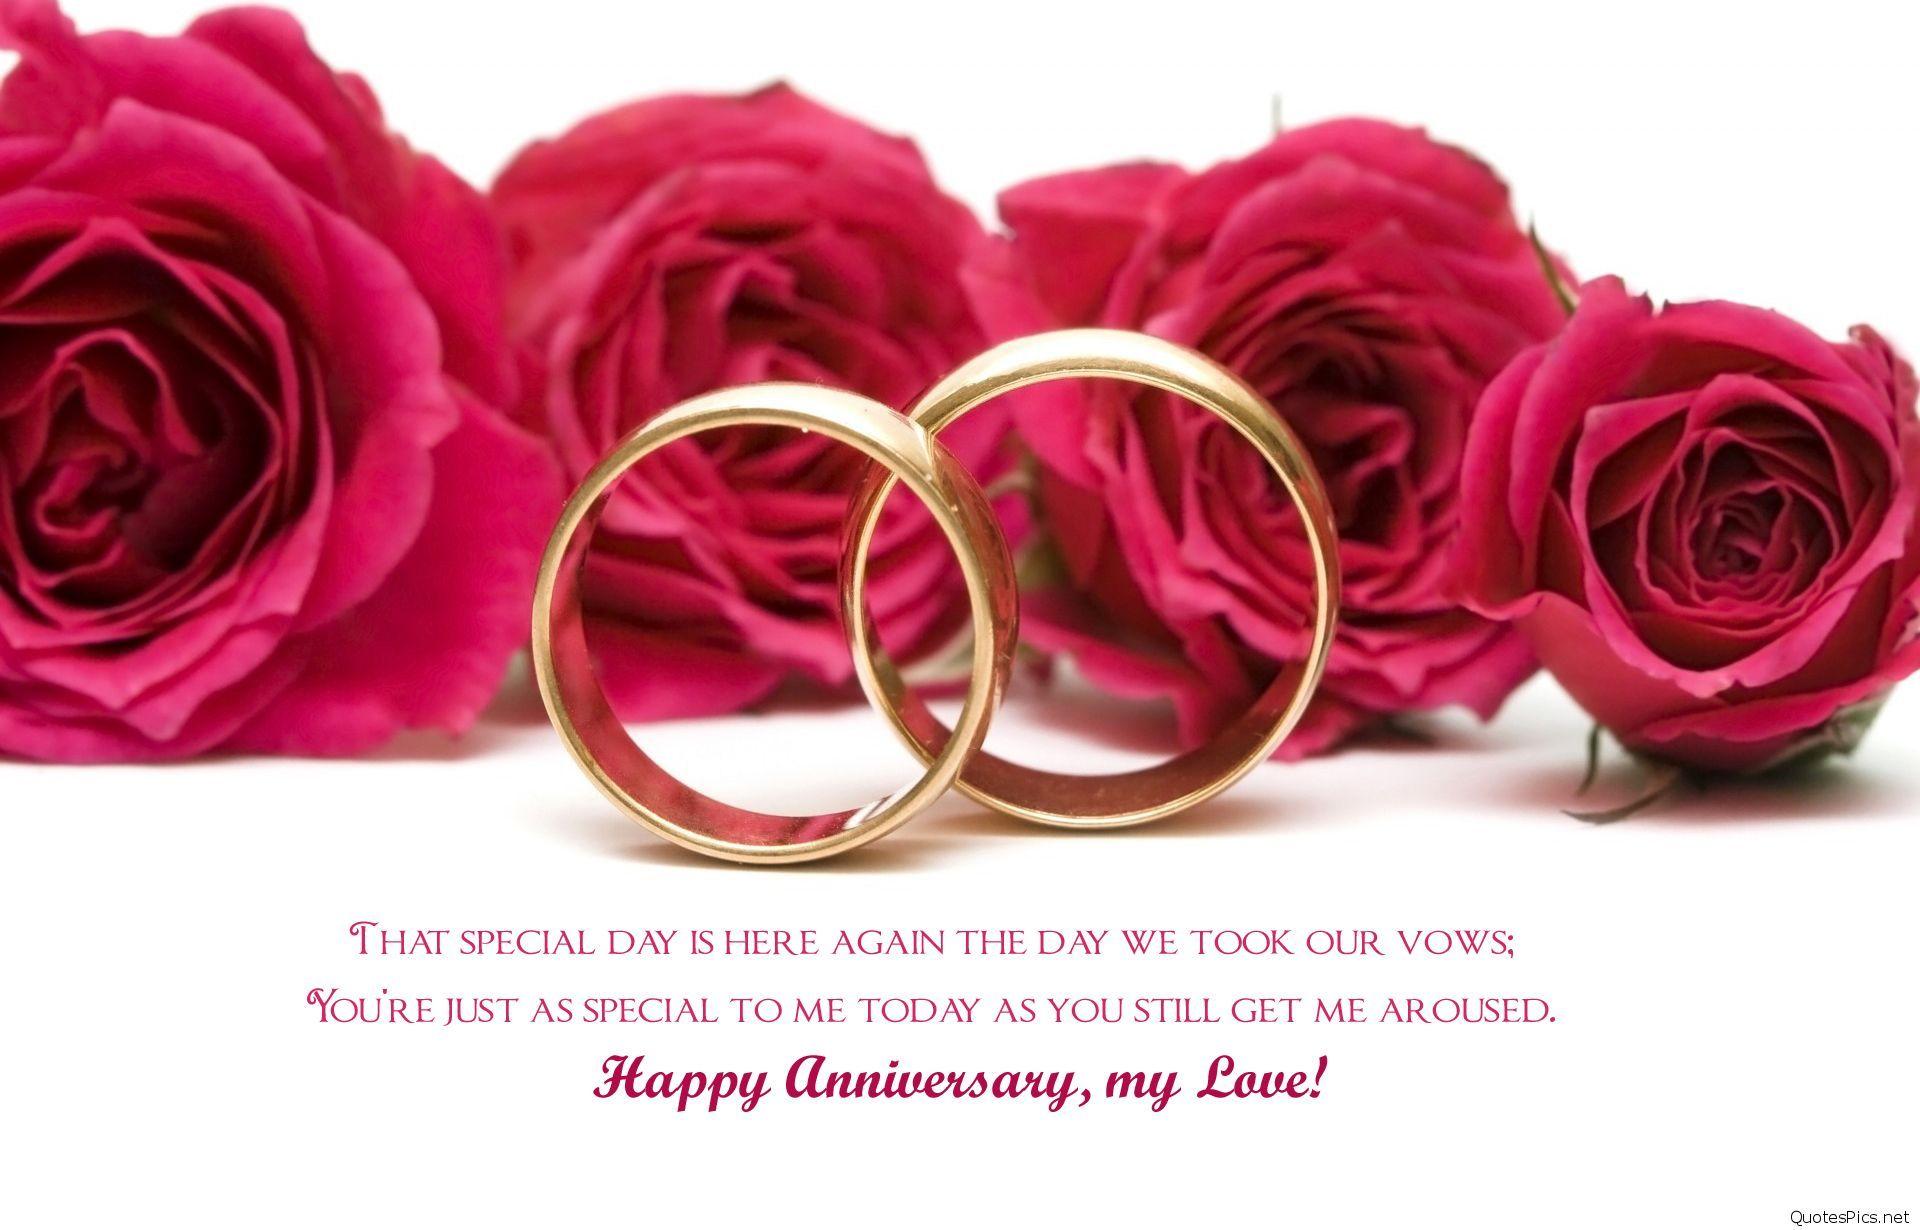 Happy 2nd wedding anniversary pics, cards, sayings